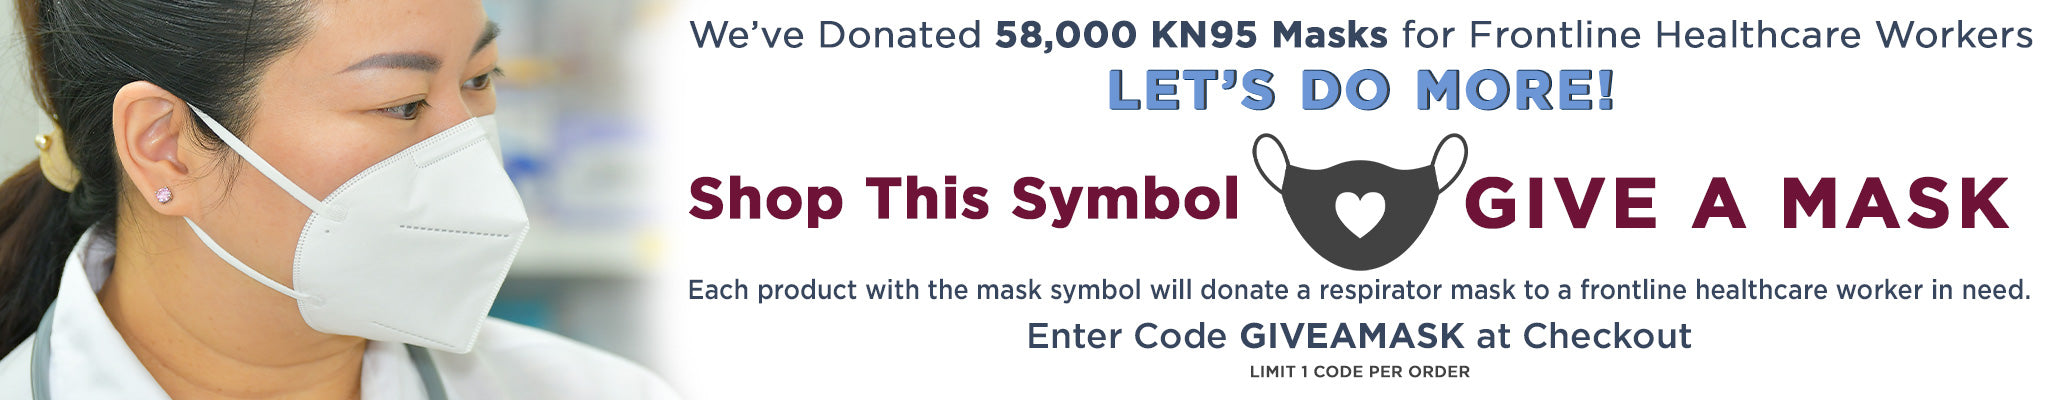 We've Donated 58,000 KN95 Masks for Frontline Healthcare Workers | Let's Do More! | Shop This Symbol Give a Mask | Each product with the mask symbol will donate a respirator mask to a frontline healthcare worker in need | Enter Code GIVEAMASK at checkout | Limit 1 code per order